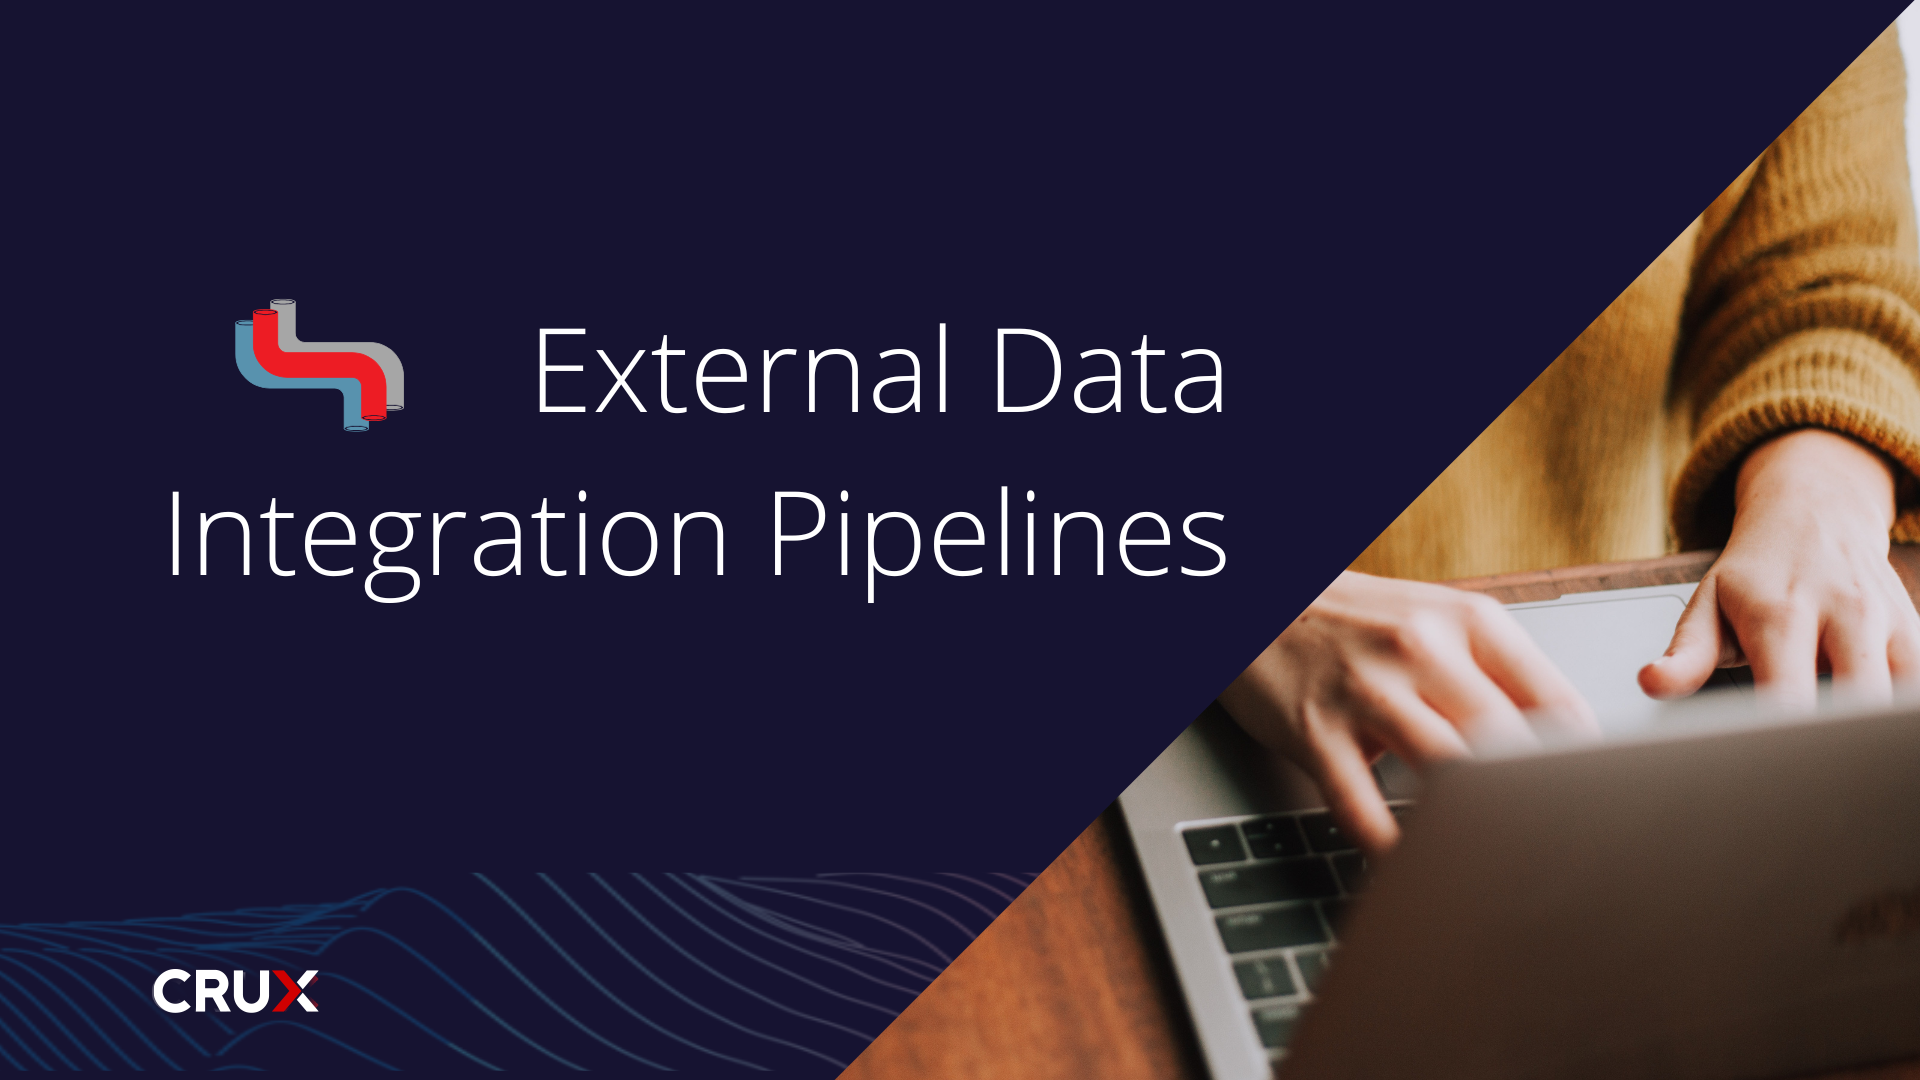 Crux enables external data integration with Crux Data Pipelines.